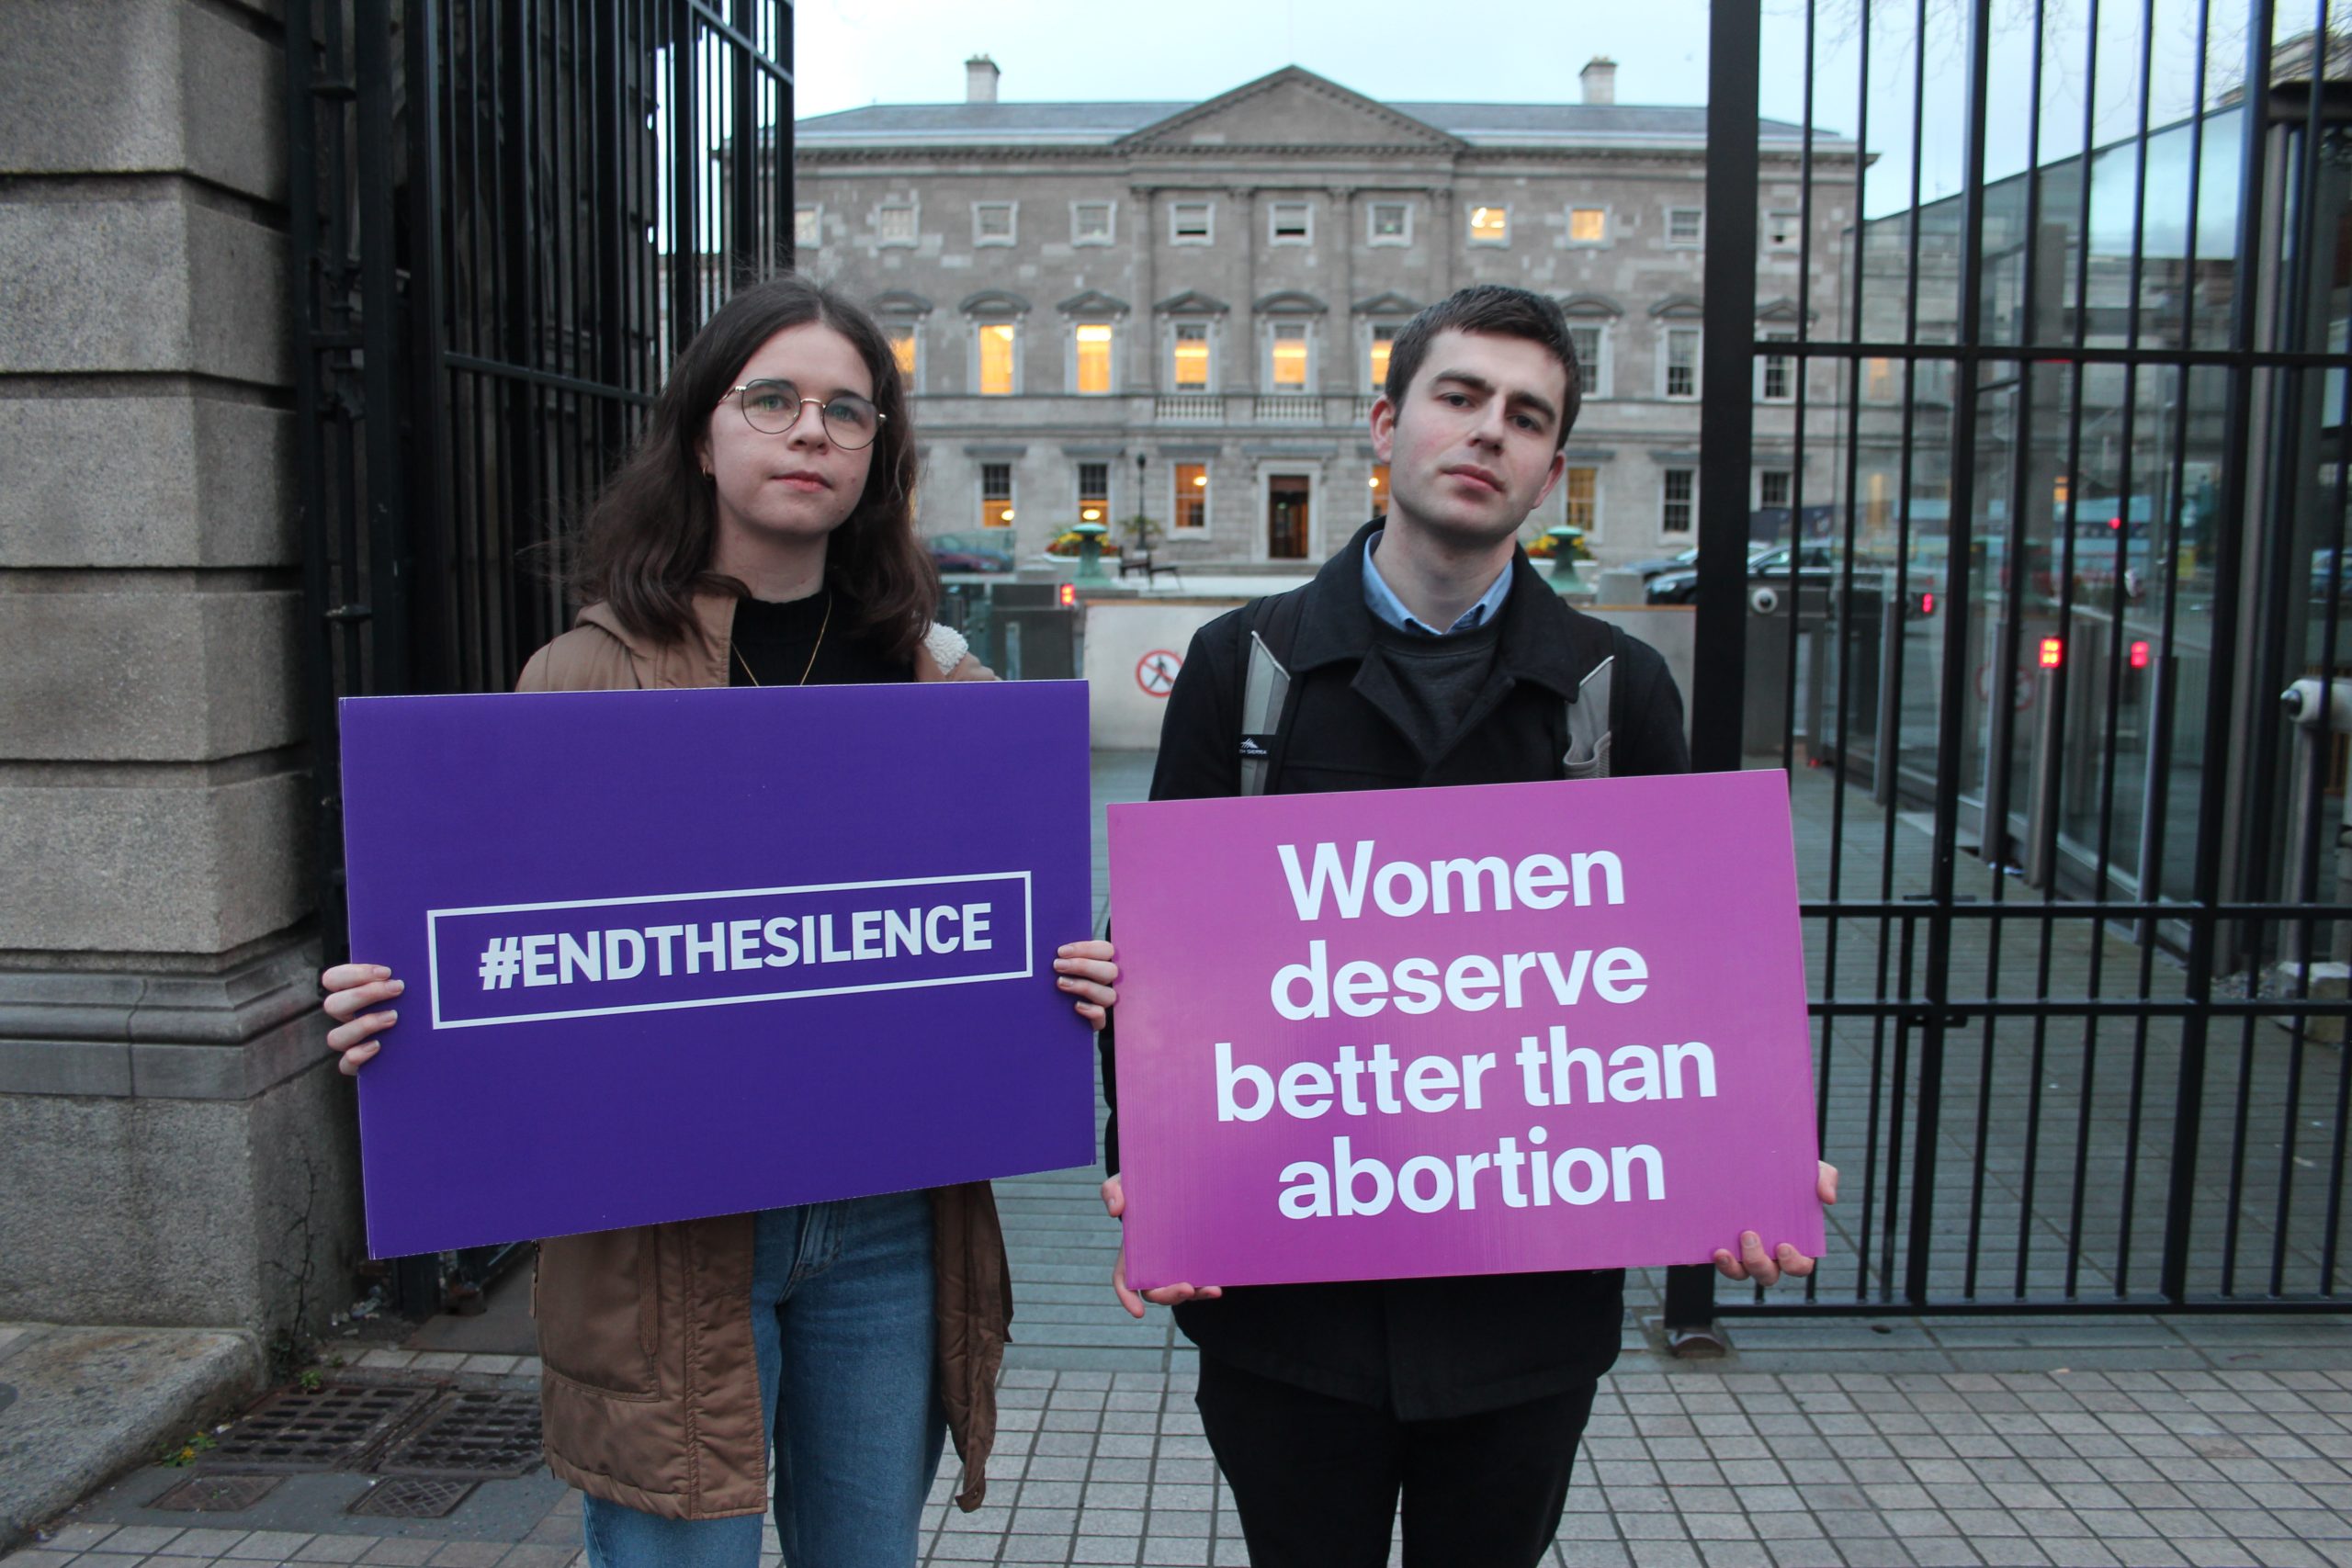 26.04.2023 – News Release: Abortion now certain to be major election issue given extreme nature of review recommendations, says PLC